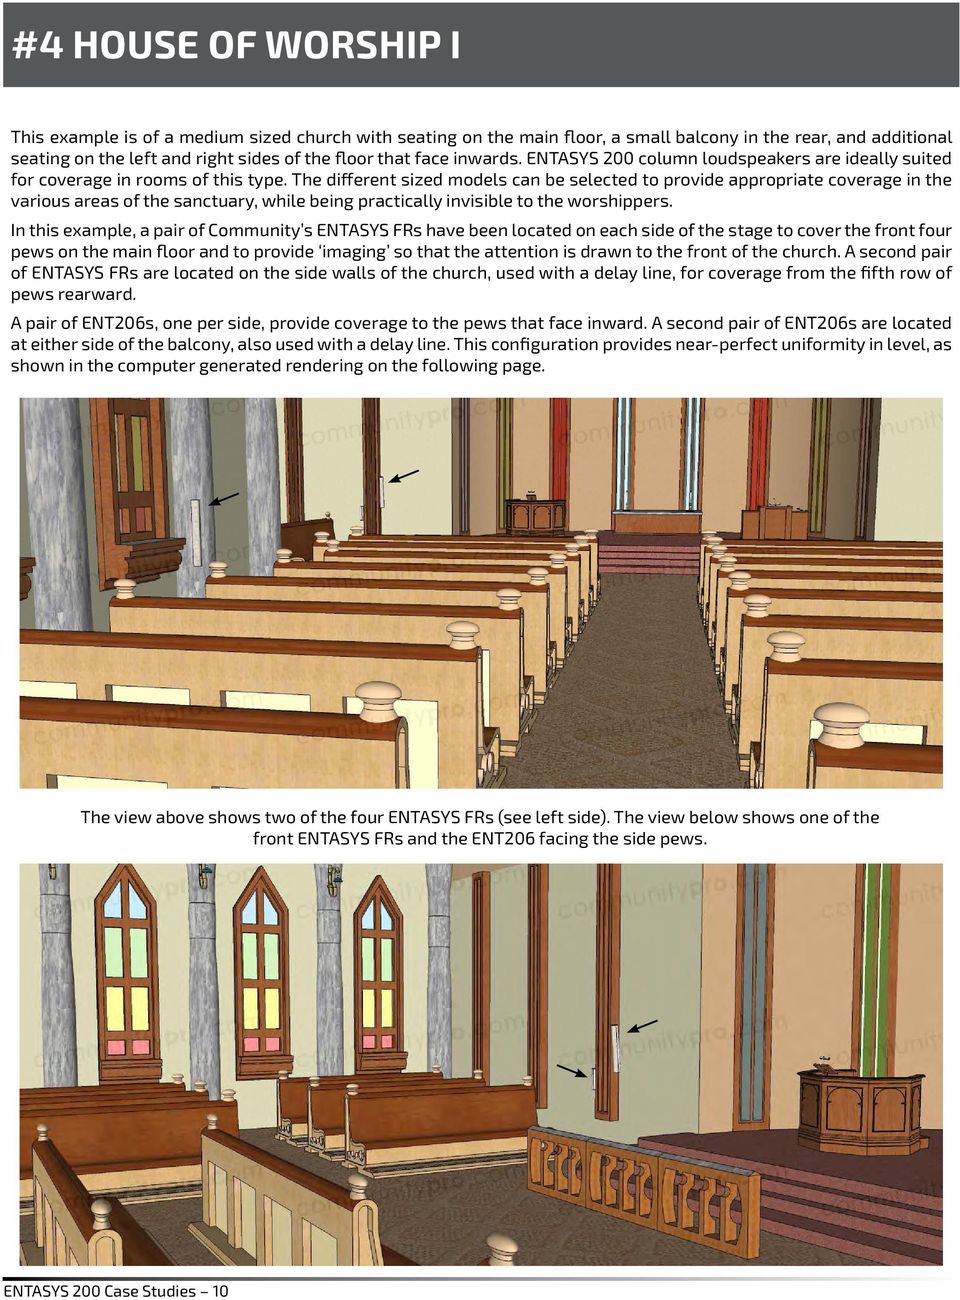 The different sized models can be selected to provide appropriate coverage in the various areas of the sanctuary, while being practically invisible to the worshippers.